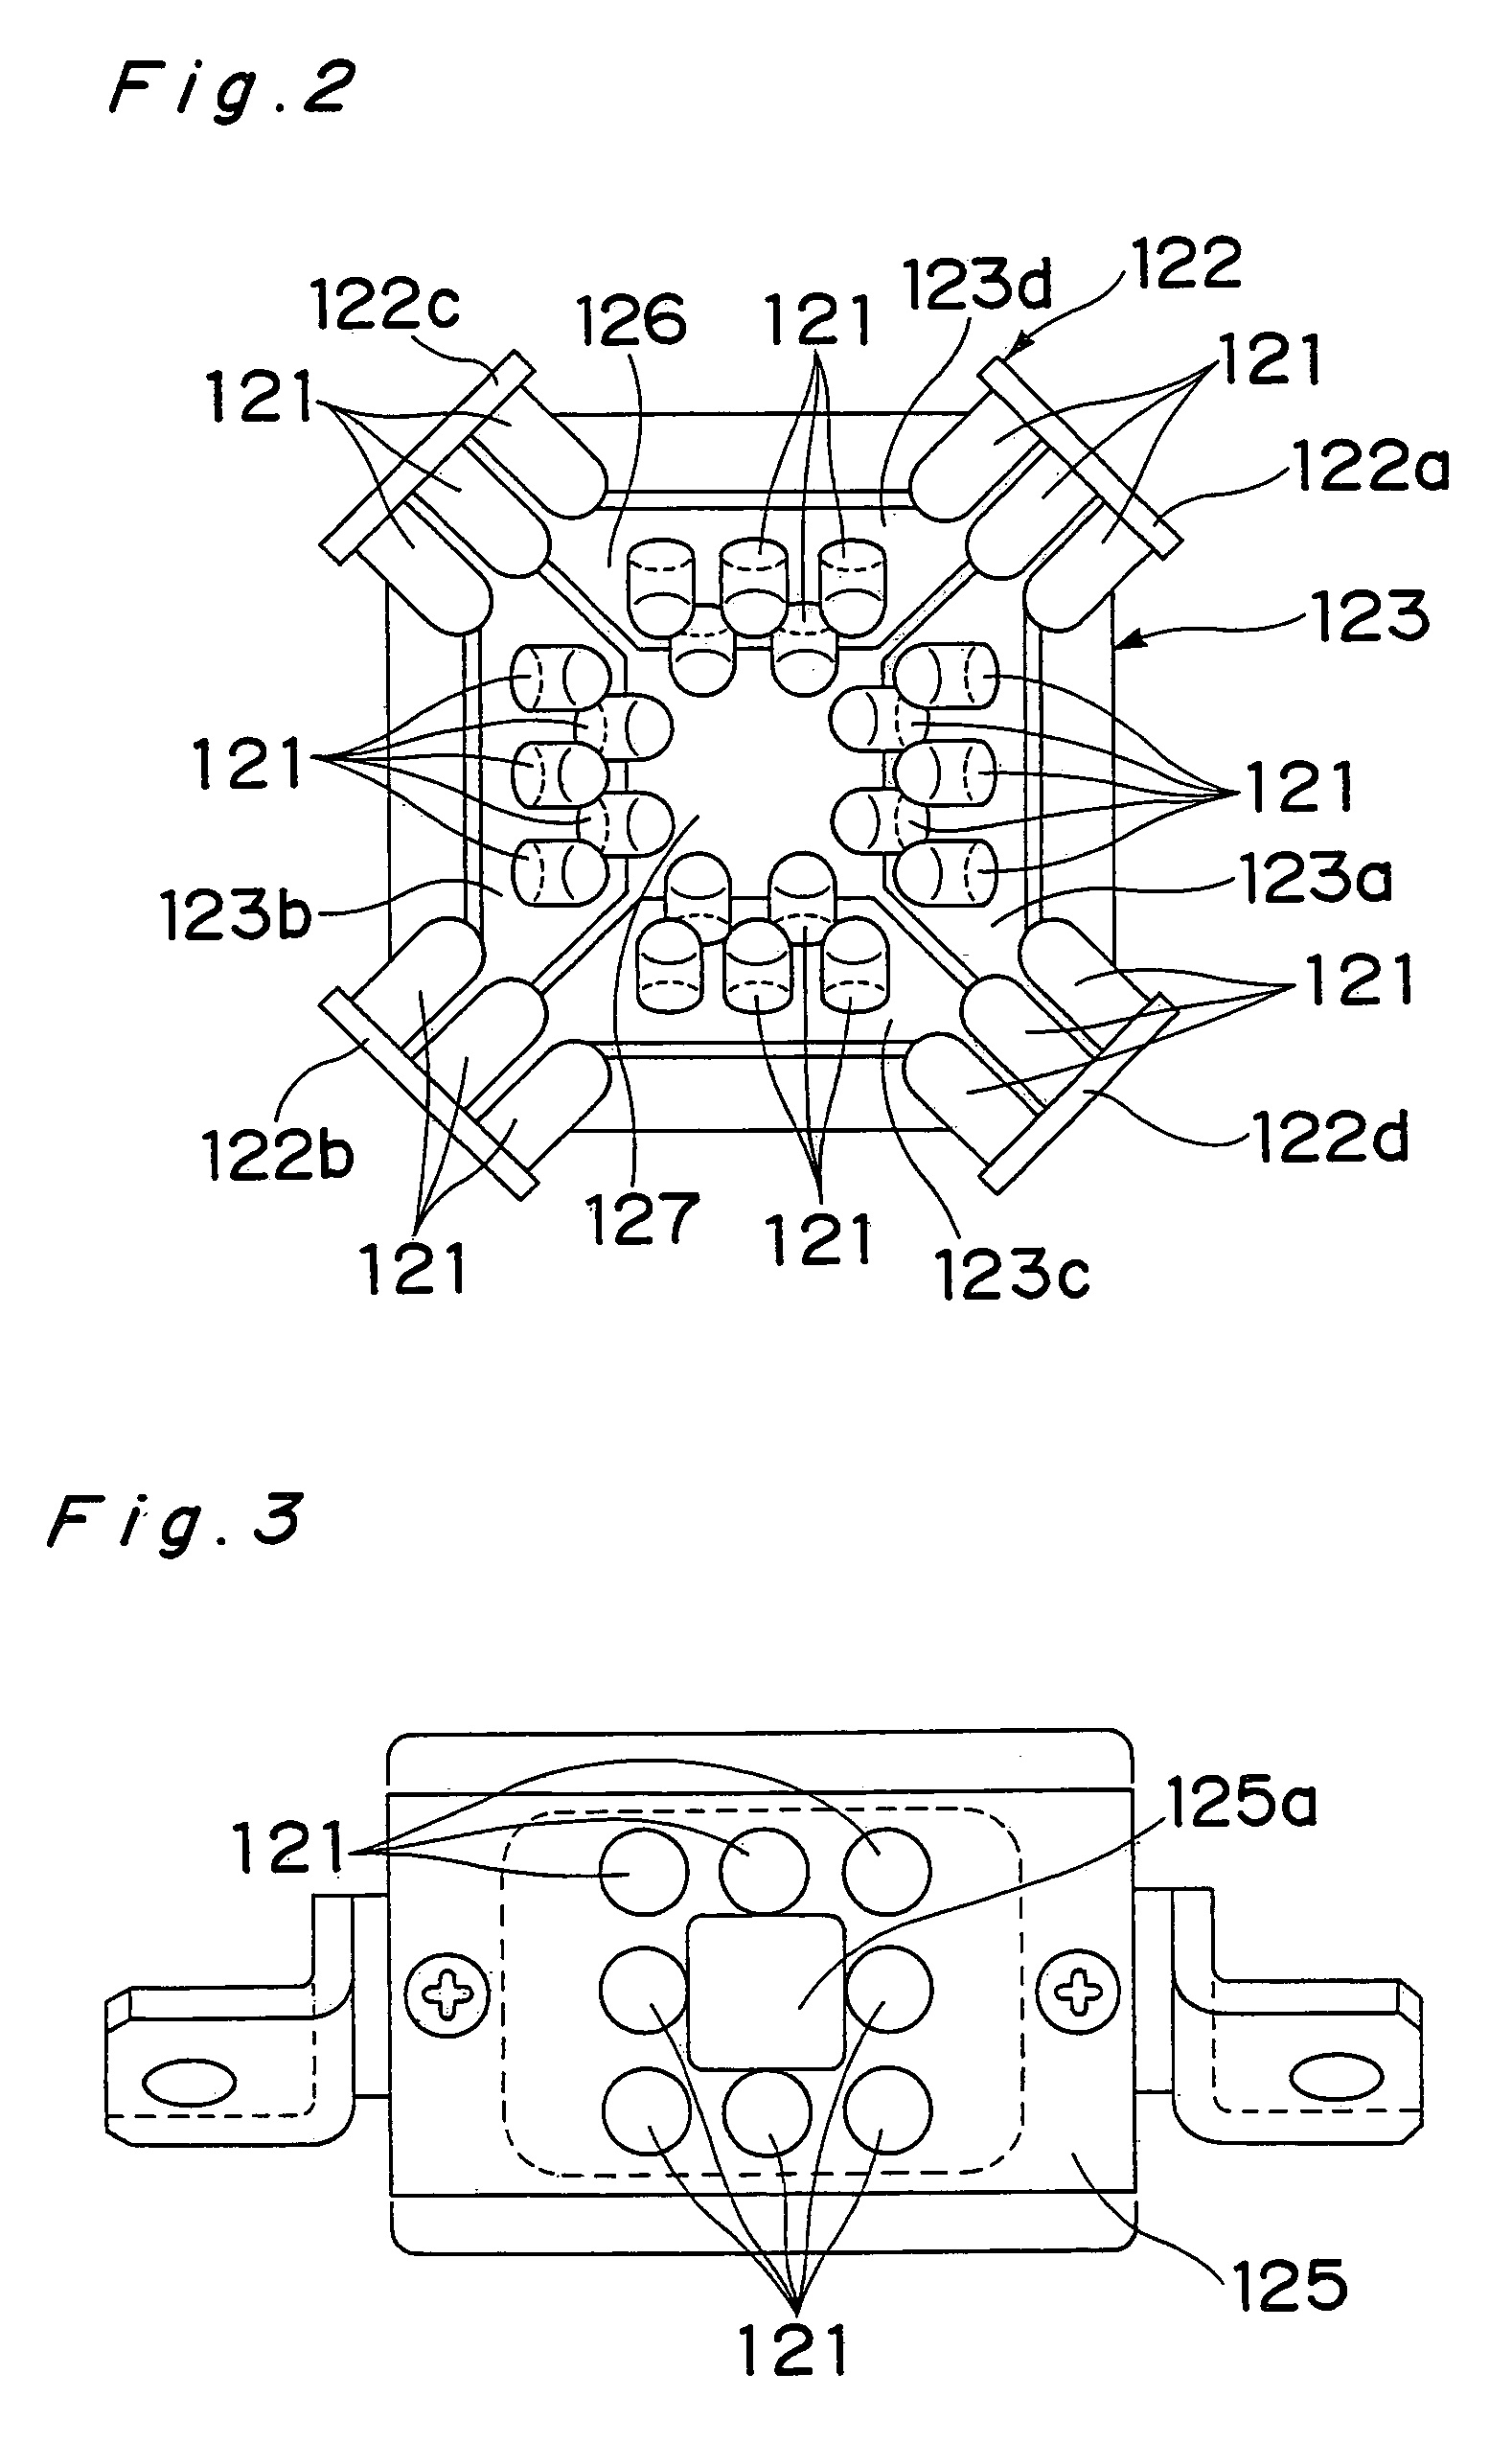 Method for determining whether a component holder is defective